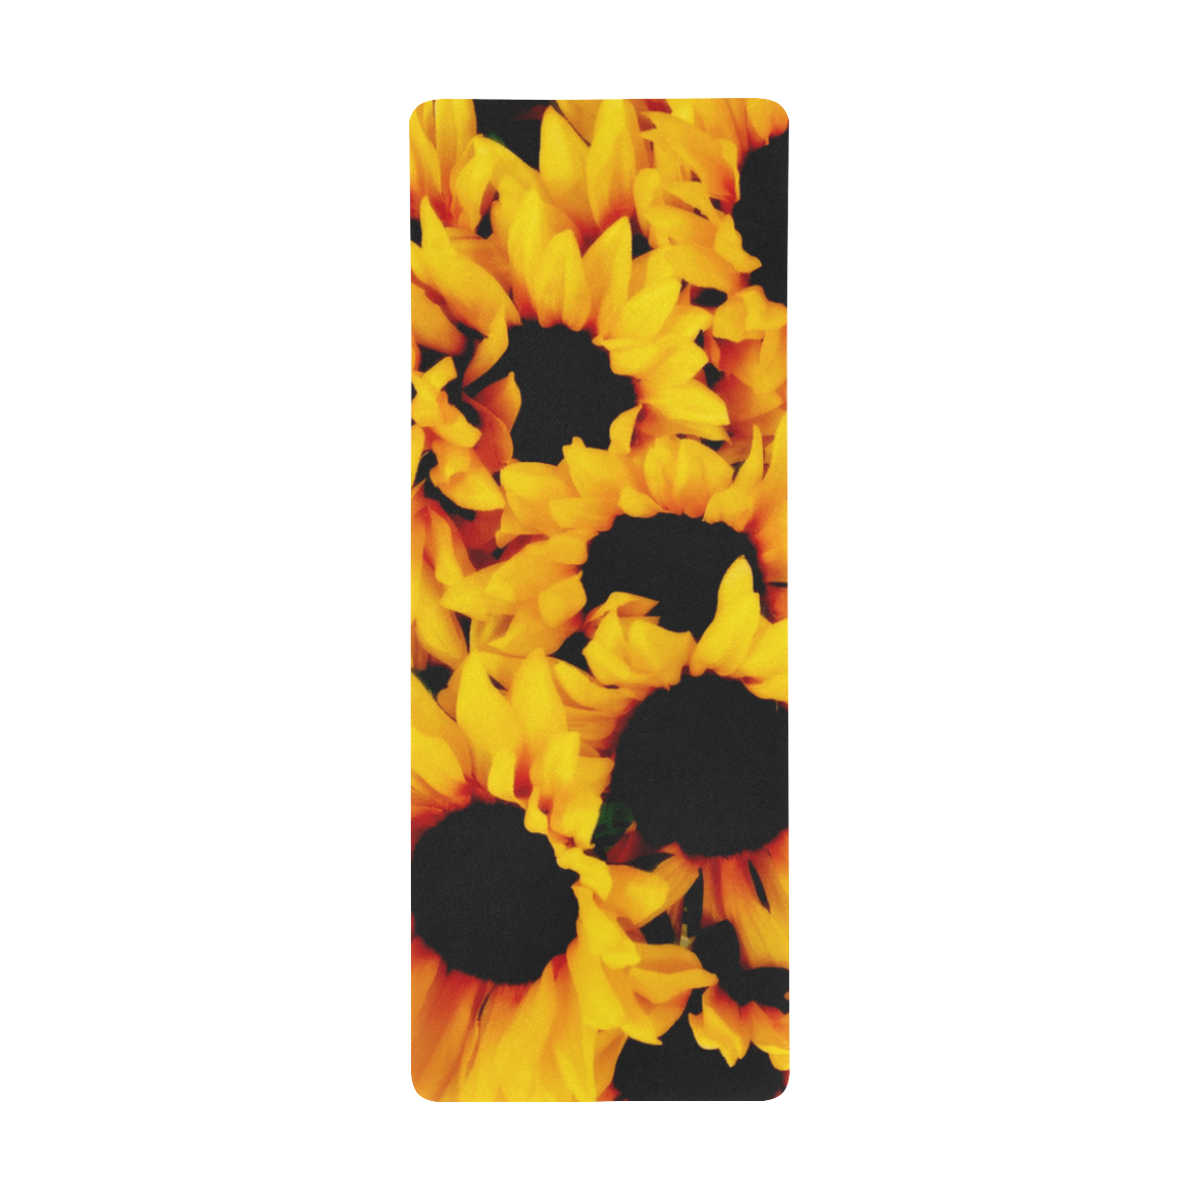 Sunny Sunflower Gaming Mousepad (31"x12")